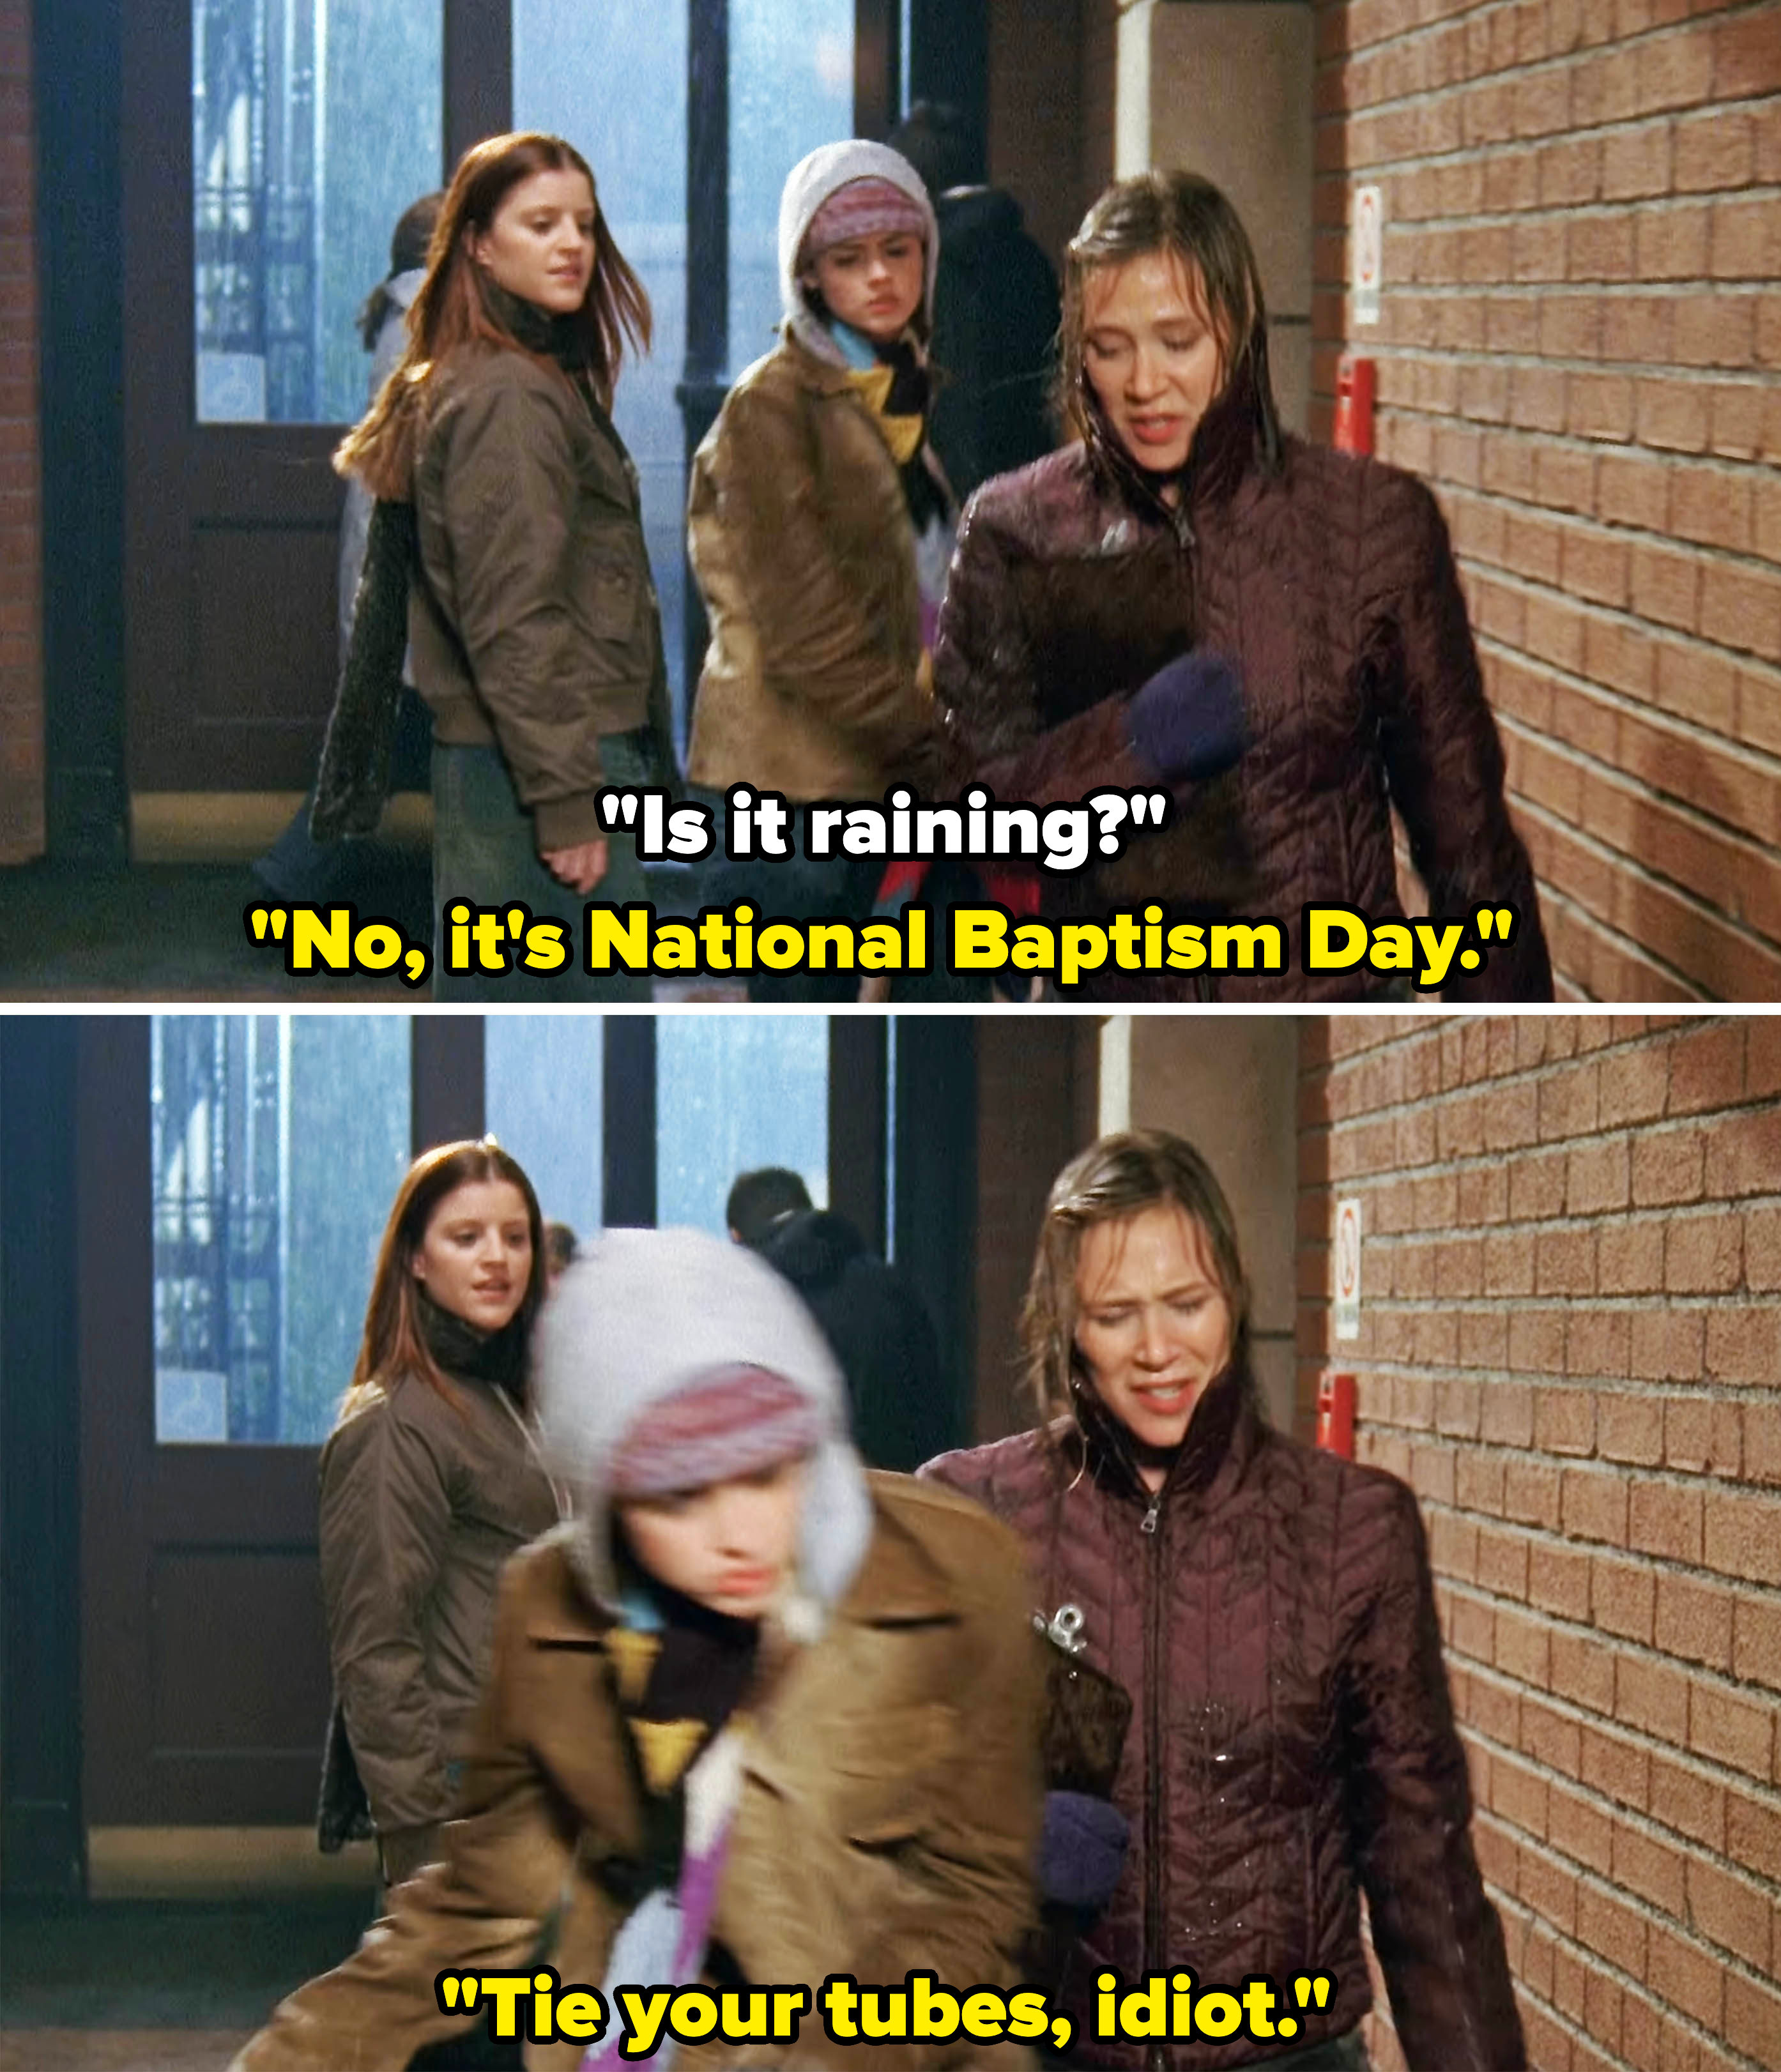 Paris in Gilmore Girls tells a girl who asks if it&#x27;s raining, &quot;No, it&#x27;s National Baptism Day. Tie your tubes, idiot&quot;